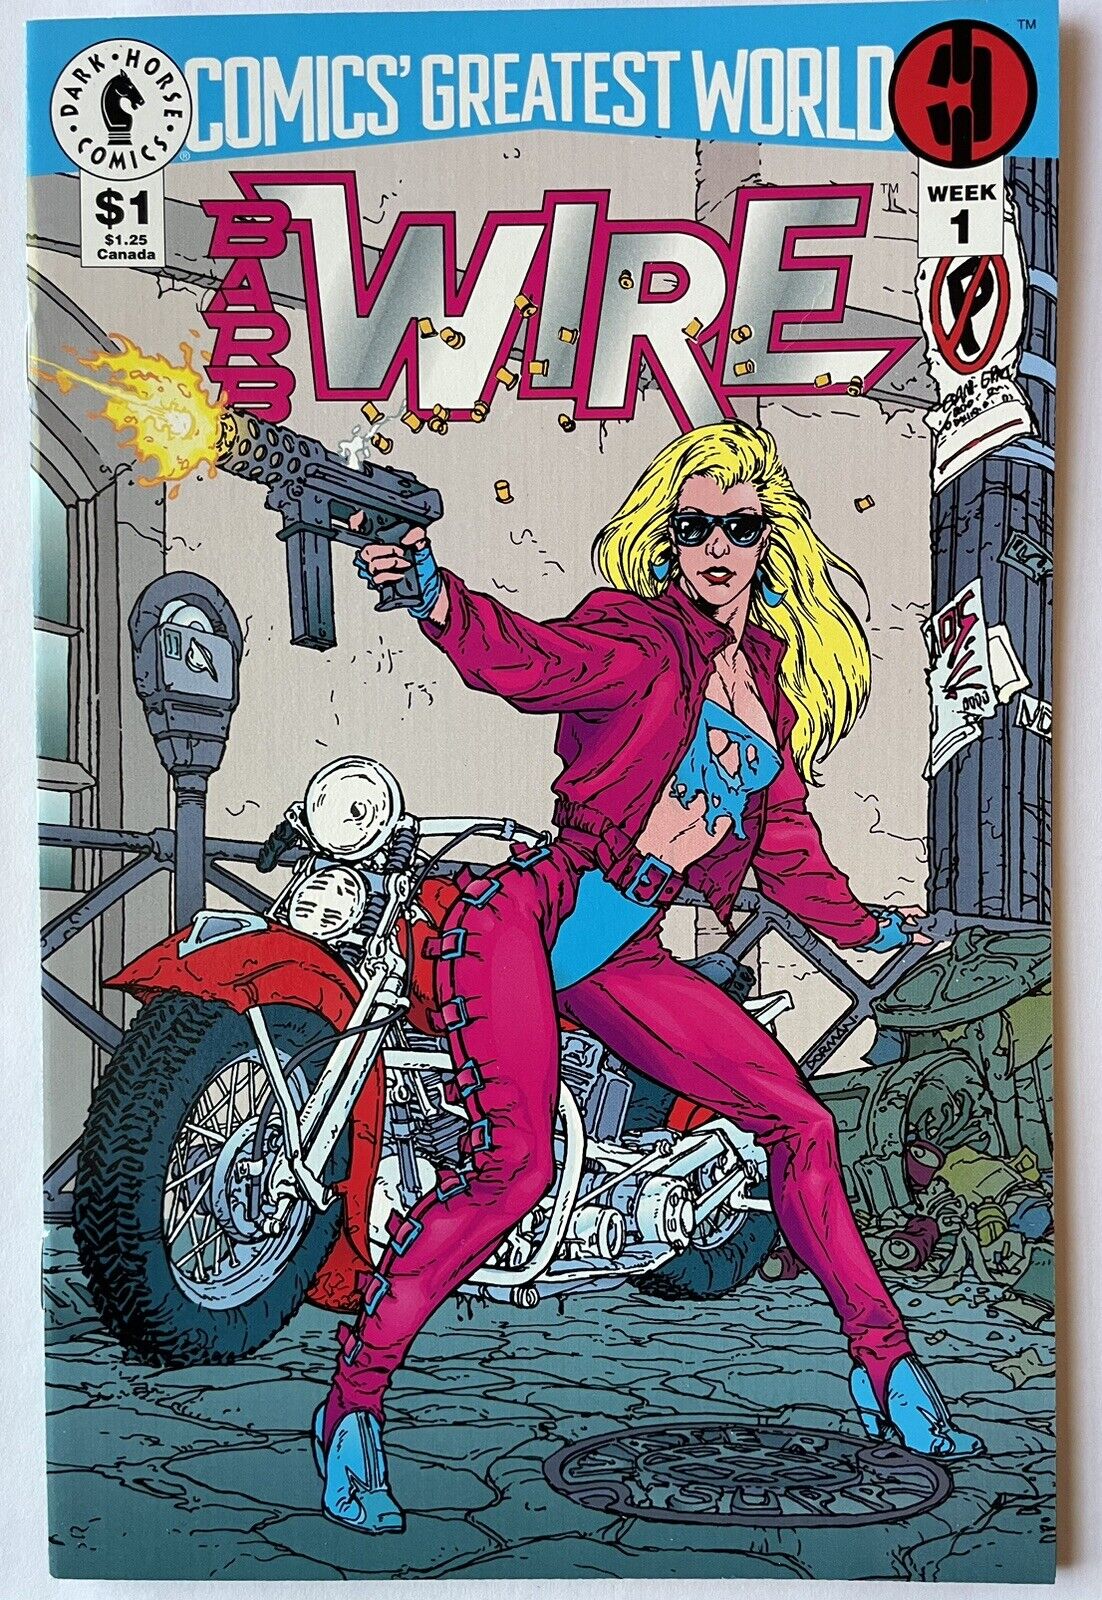 Comics\' Greatest World : Barb Wire #1 KEY 1st Appearance Barb Wire Pam Anderson